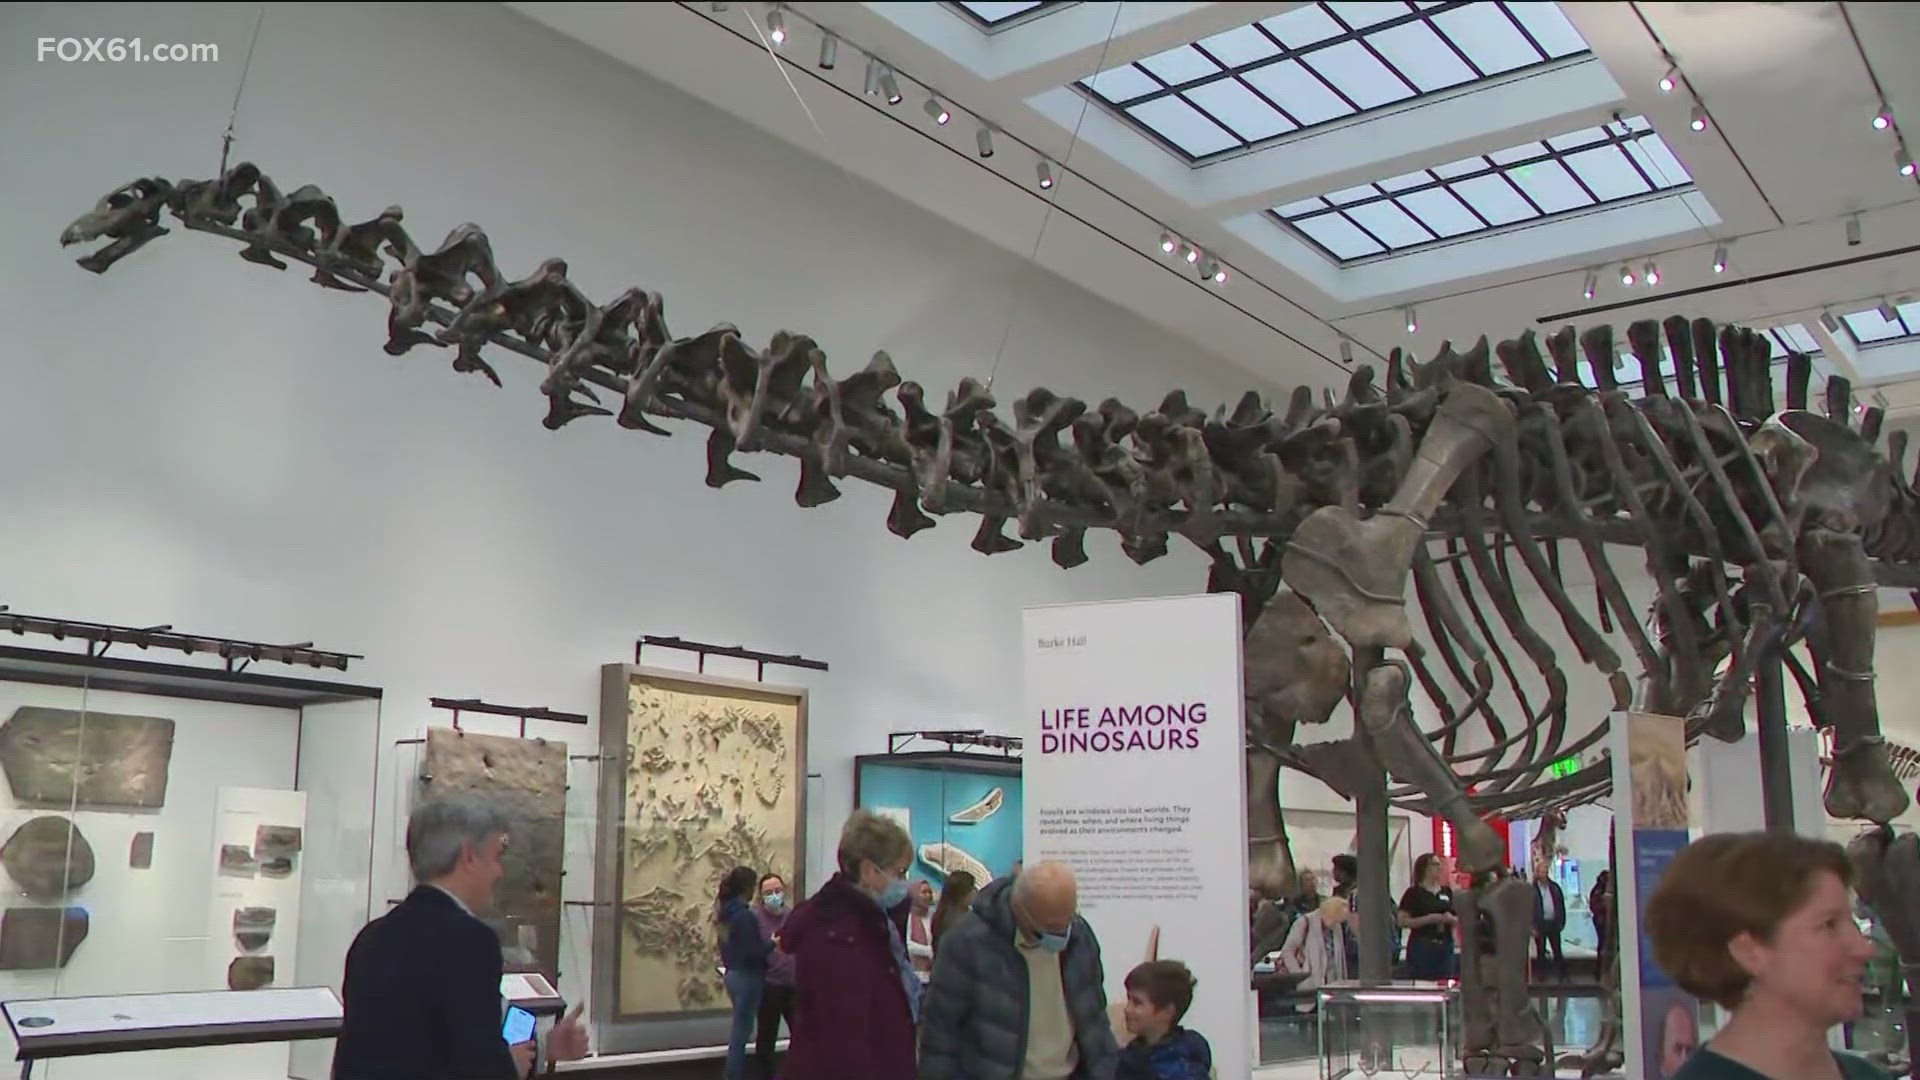 FOX61 visits the Yale Peabody Museum as it reopens to the public.